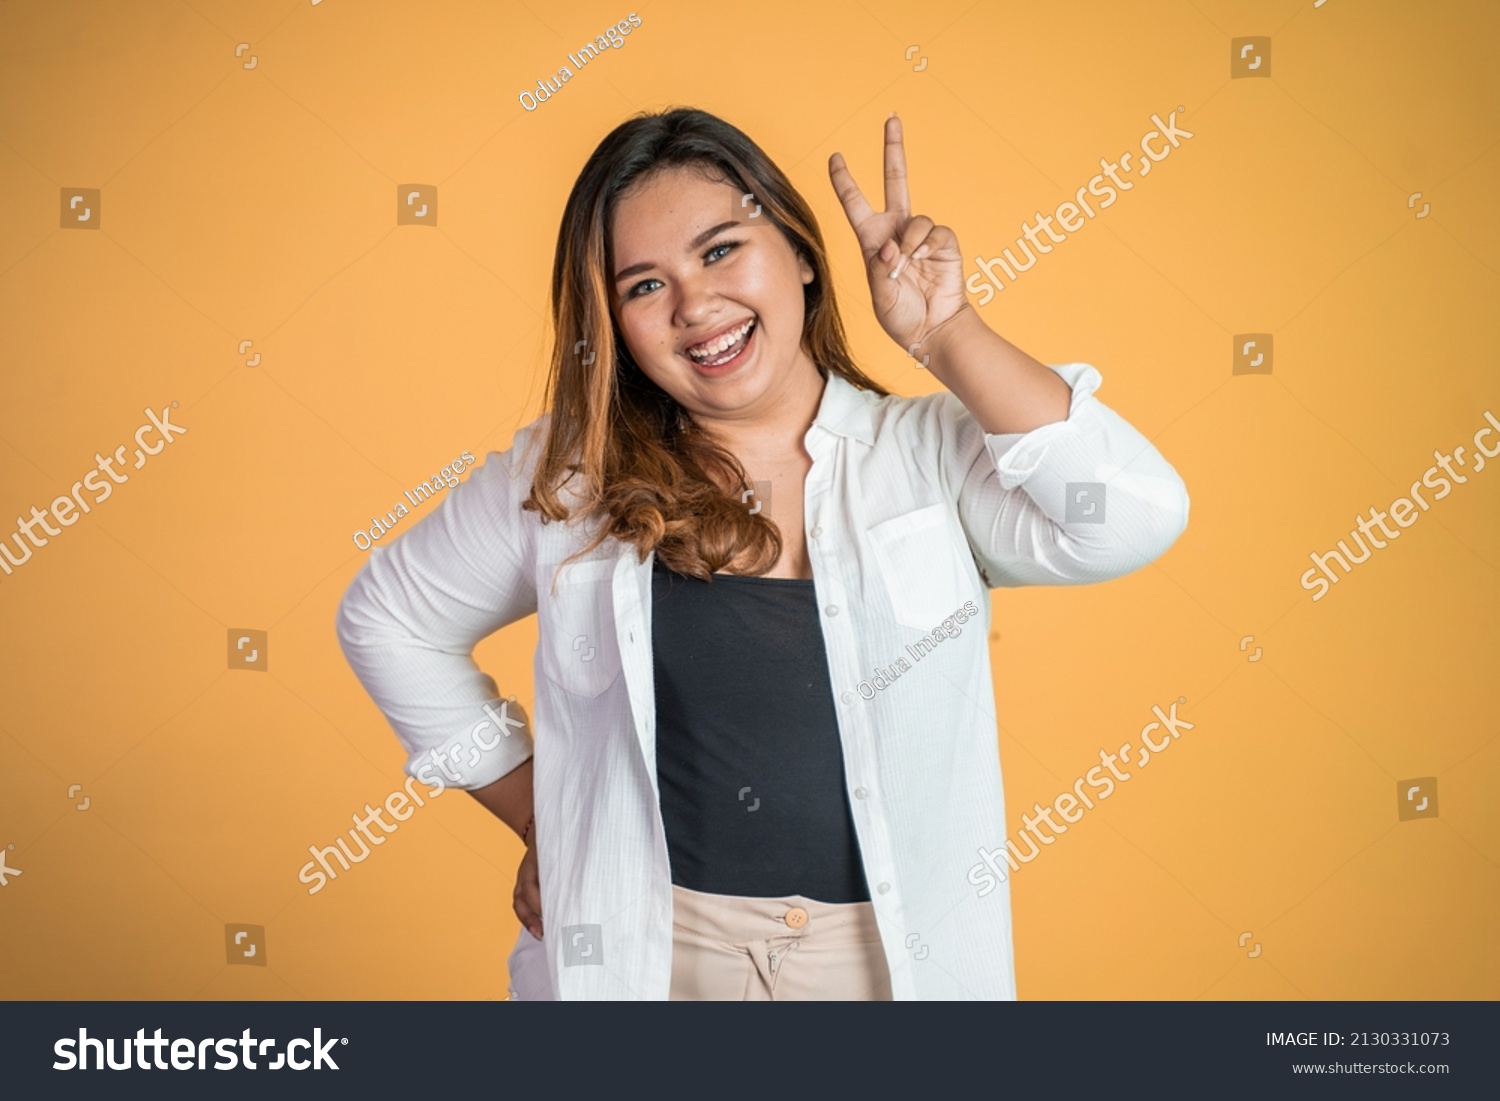 asian woman with cute hand gesture making v shape on finger #2130331073